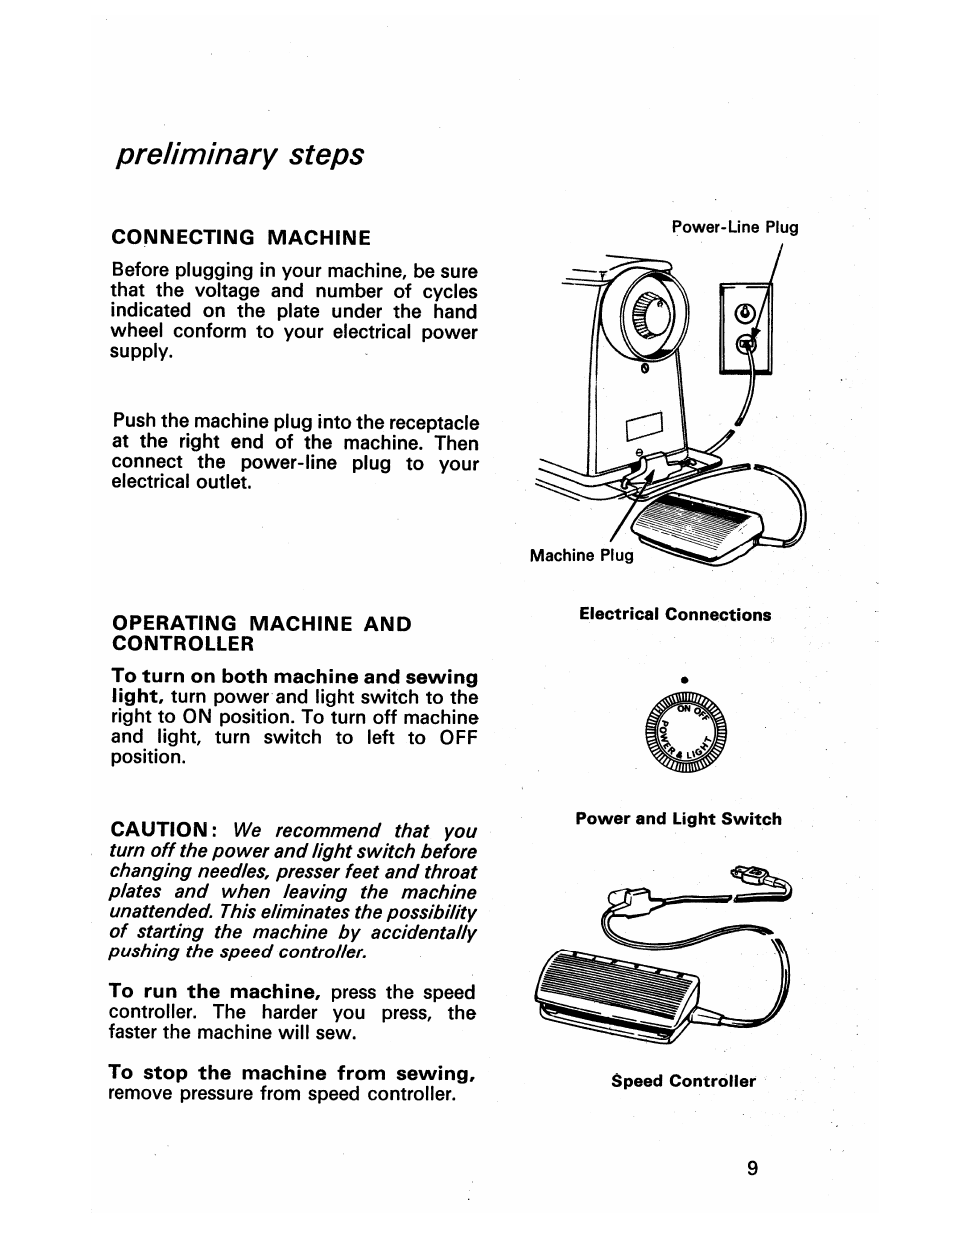 Preliminary steps, Getting ready to sew | SINGER 413 User Manual | Page 11 / 64